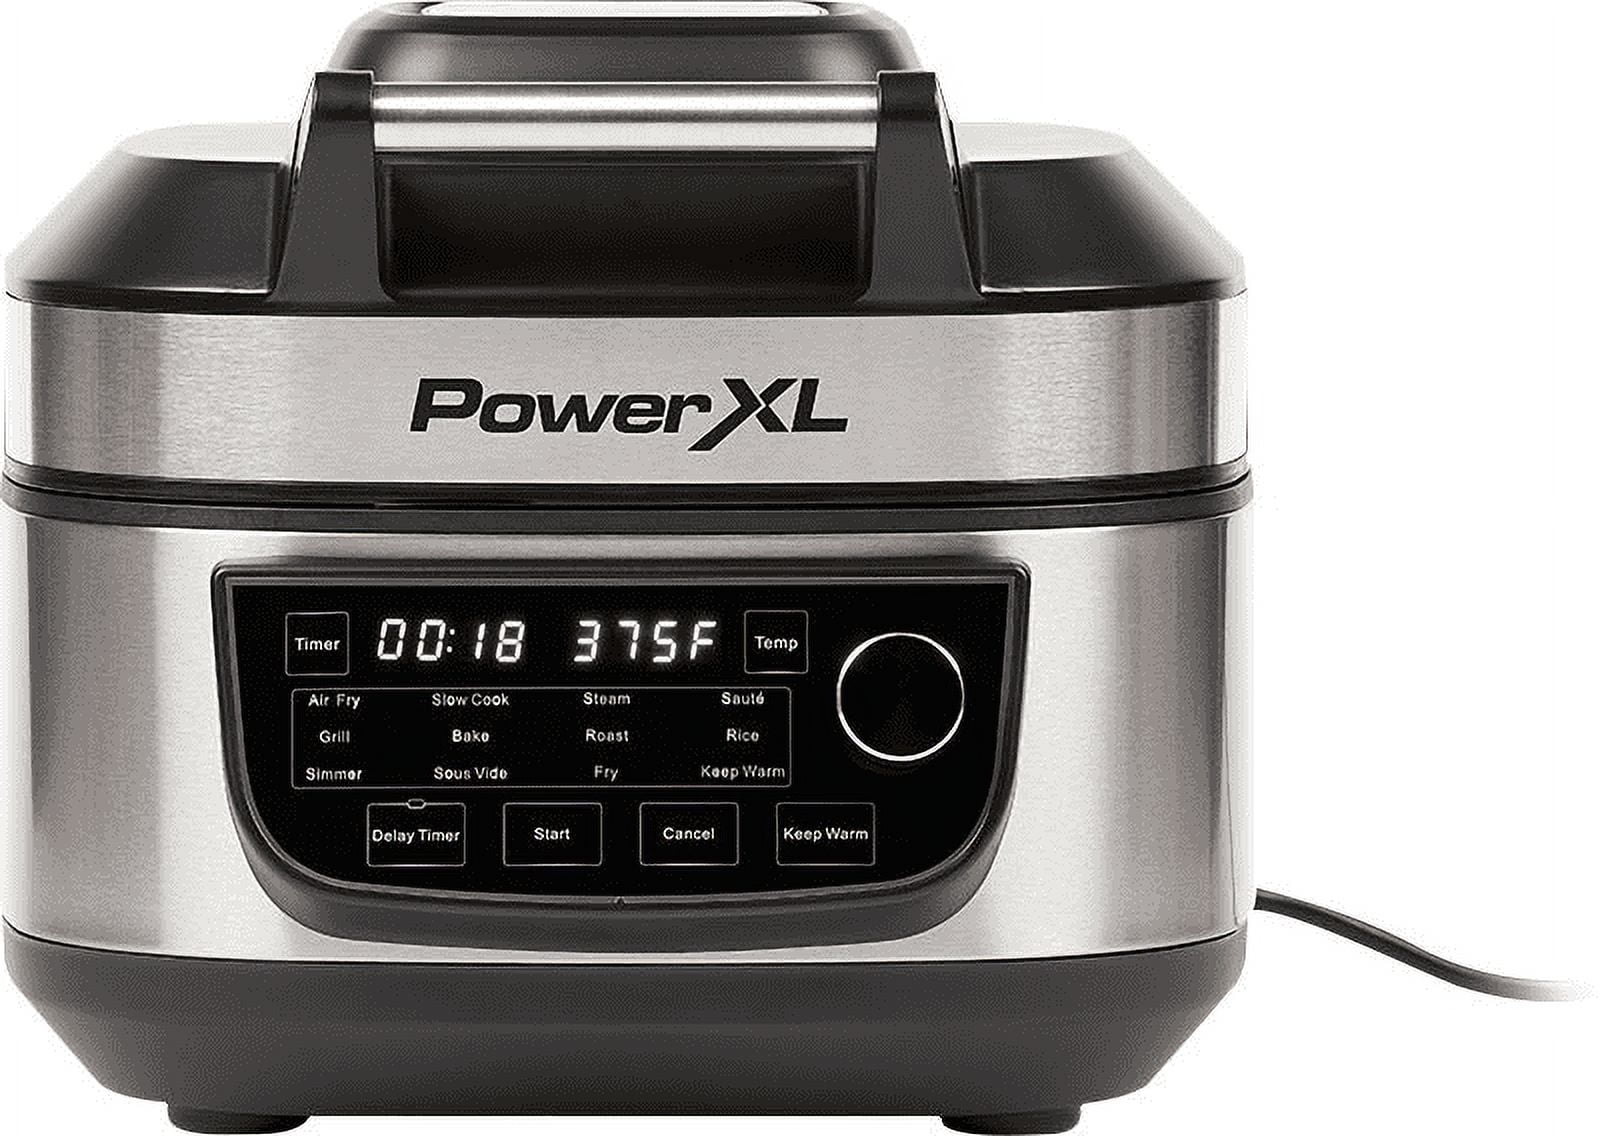 PowerXL Grill 1550-Watts, Finish Roast, 12-in-1 Slow Air Steel Air Cooker, Stainless Fryer Bake, Indoor Combo Fryer, Grill